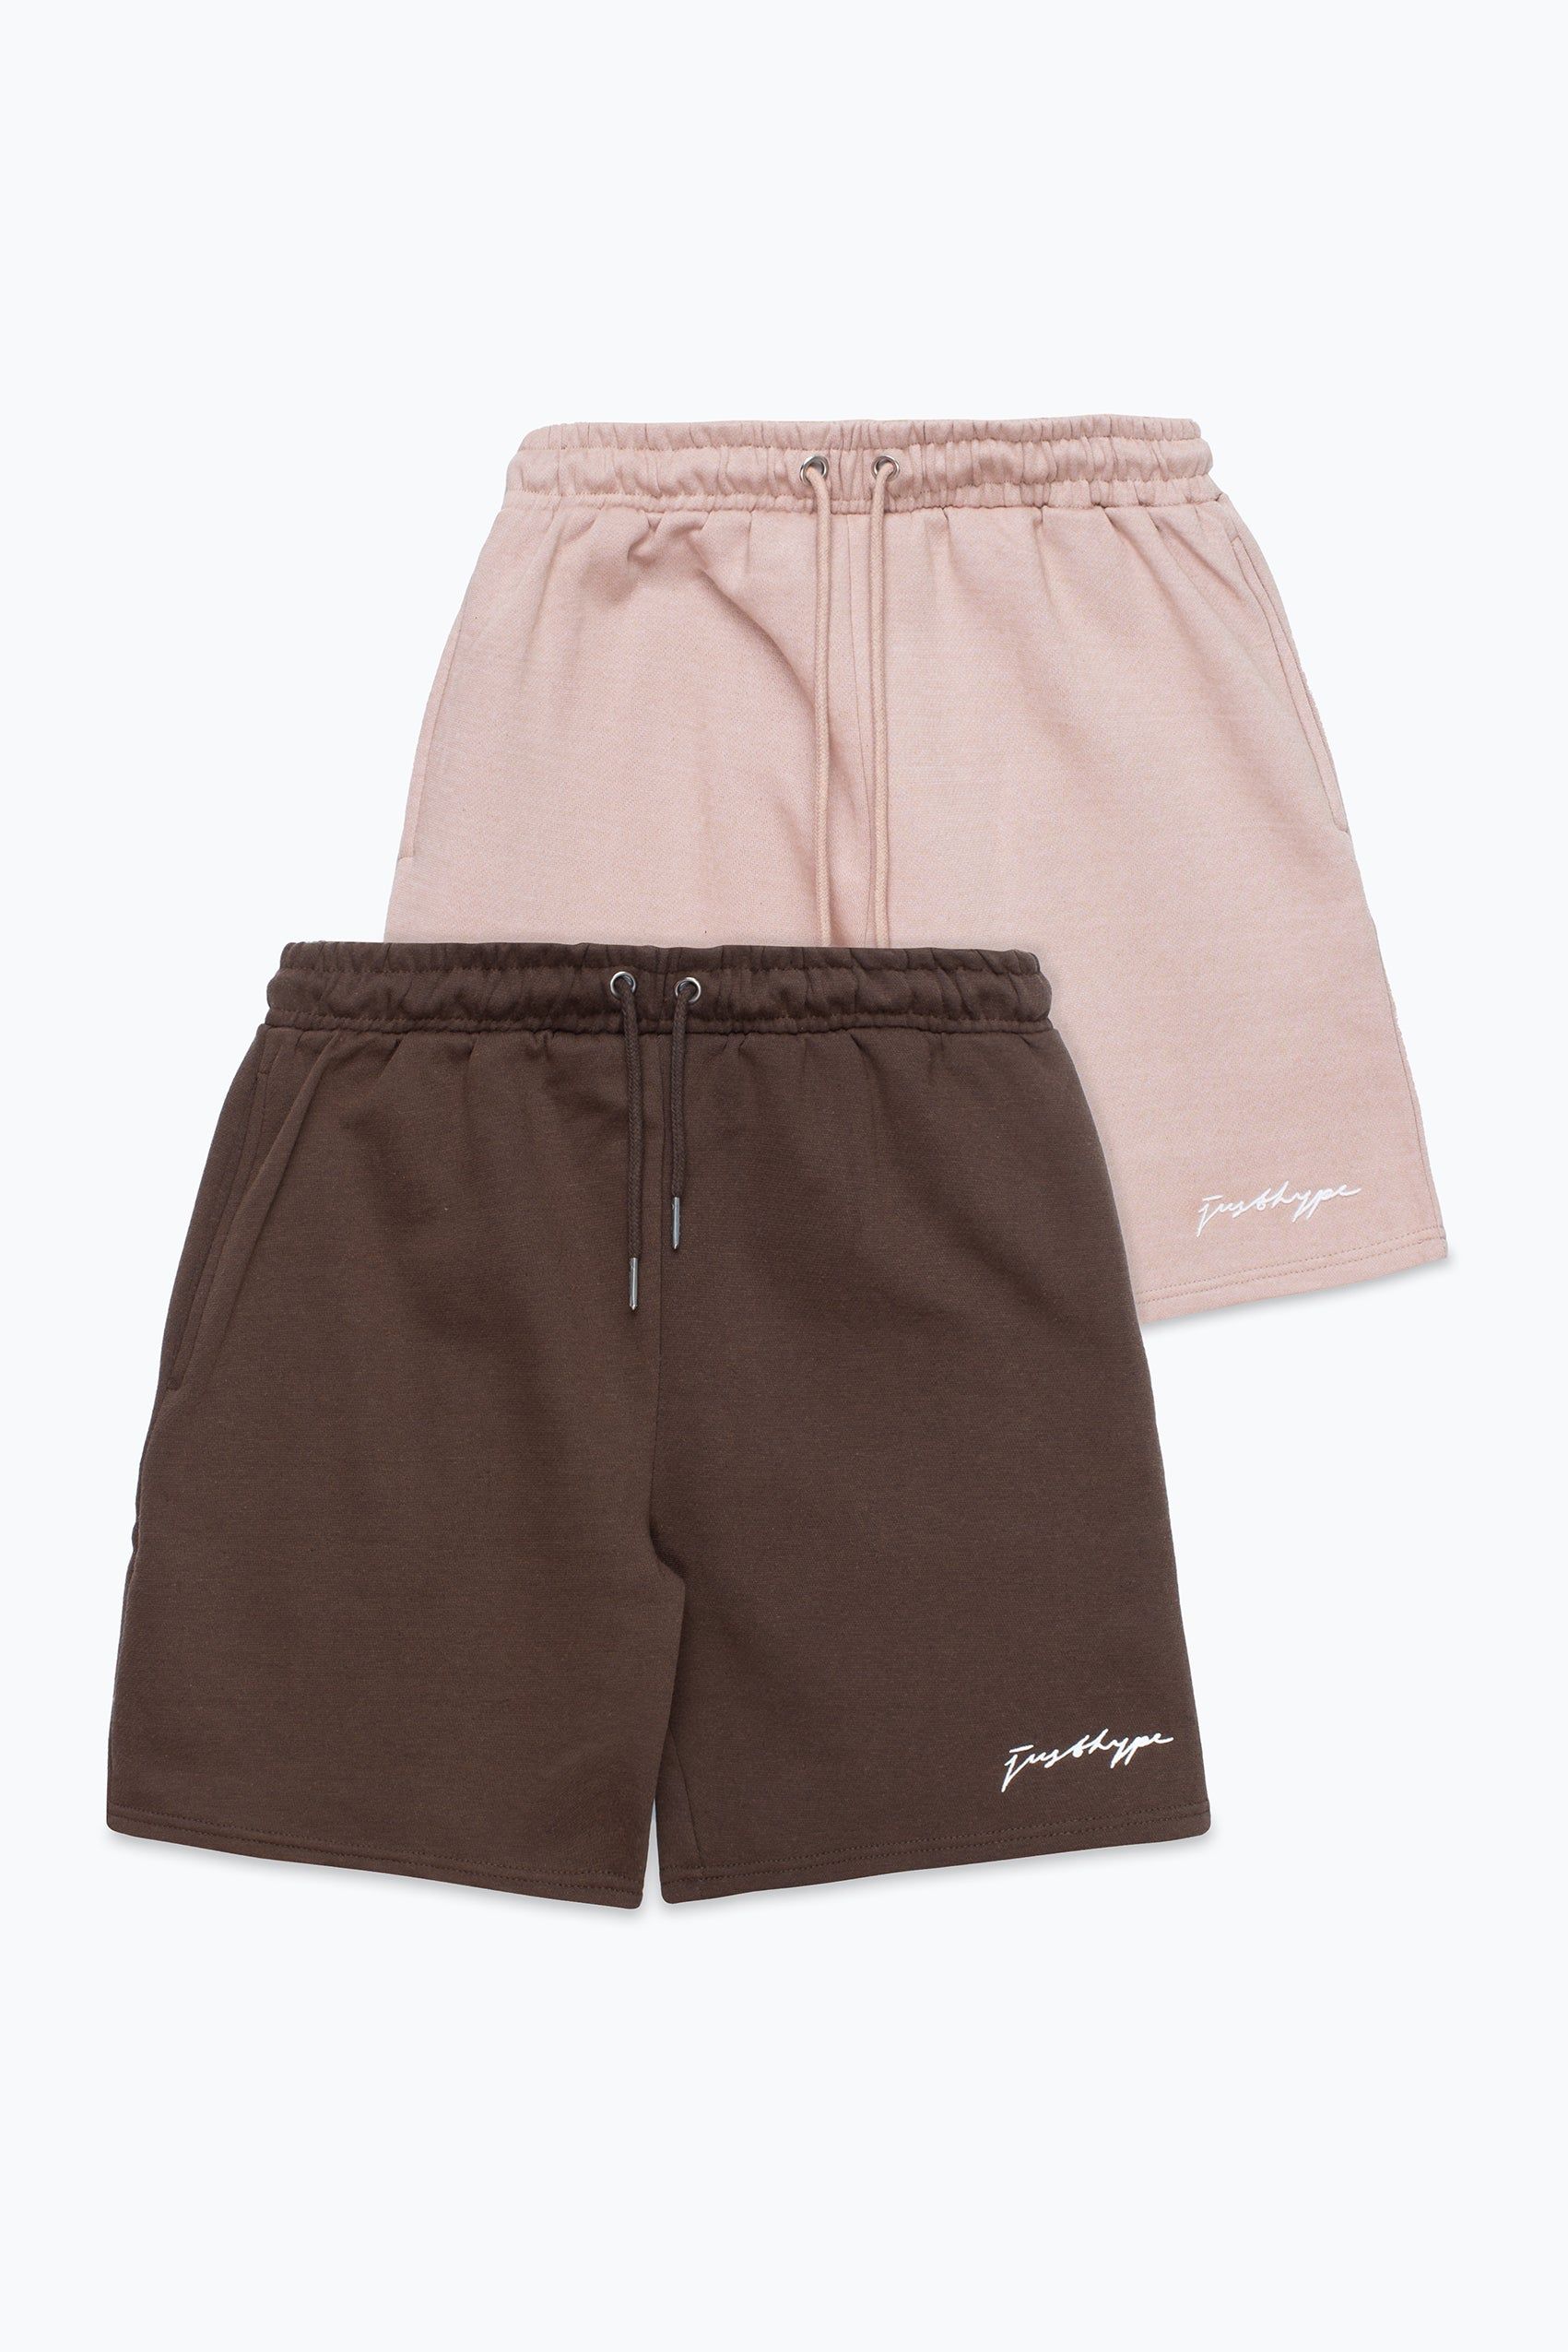 The HYPE. Men's Shorts are designed in a soft touch fabric base for the ultimate comfort. With drawstring pullers and an elasticated waistband finished with branded eyelets. The Model wears a size M. Machine washable.